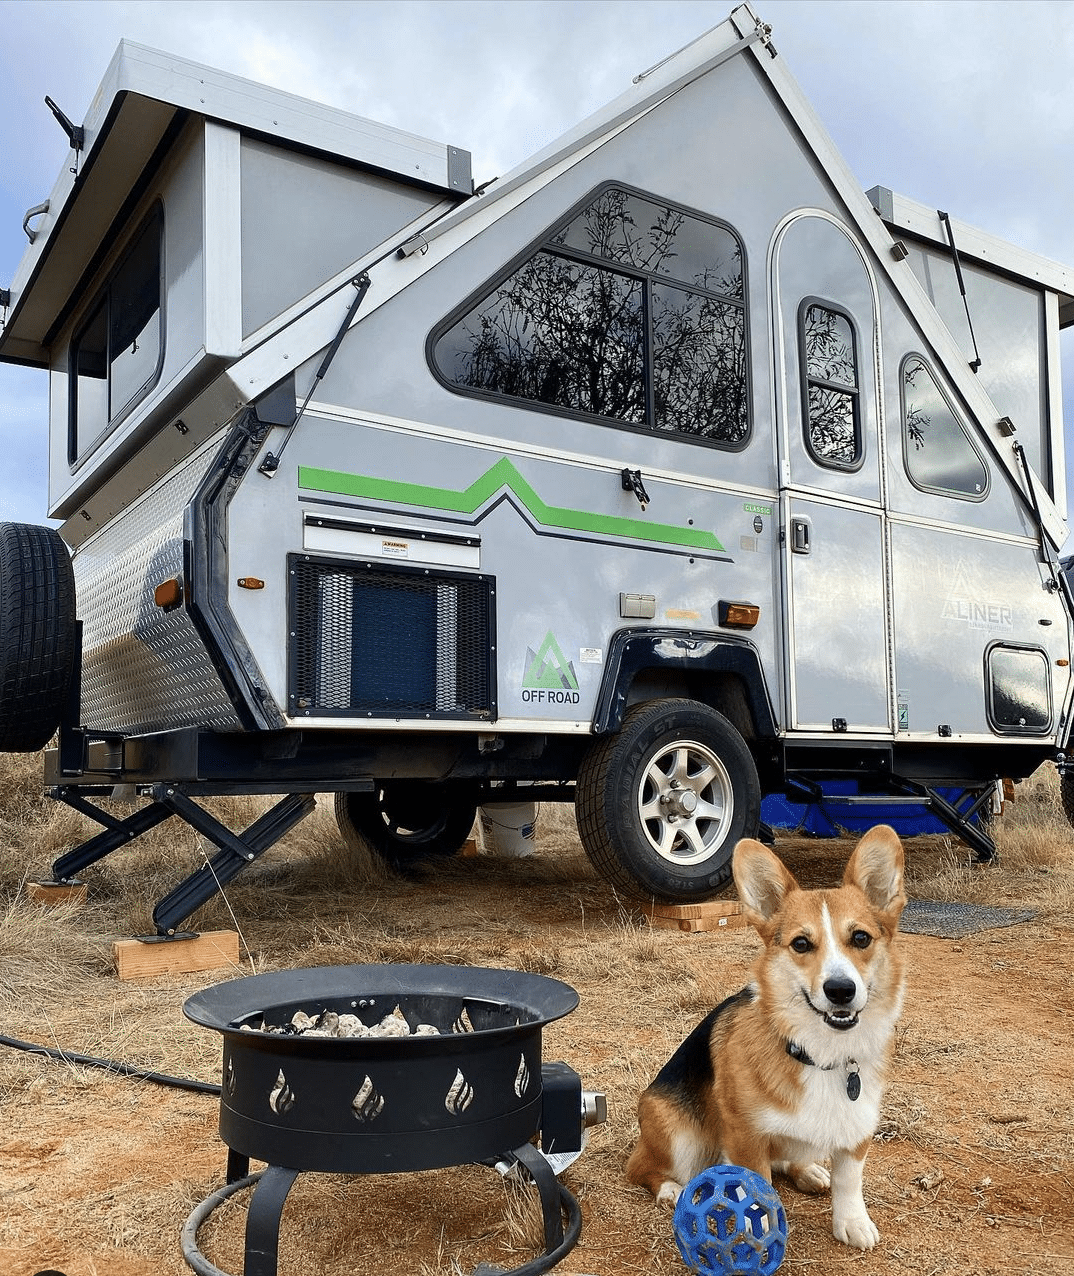 A dog sitting in the grass next to an rv.